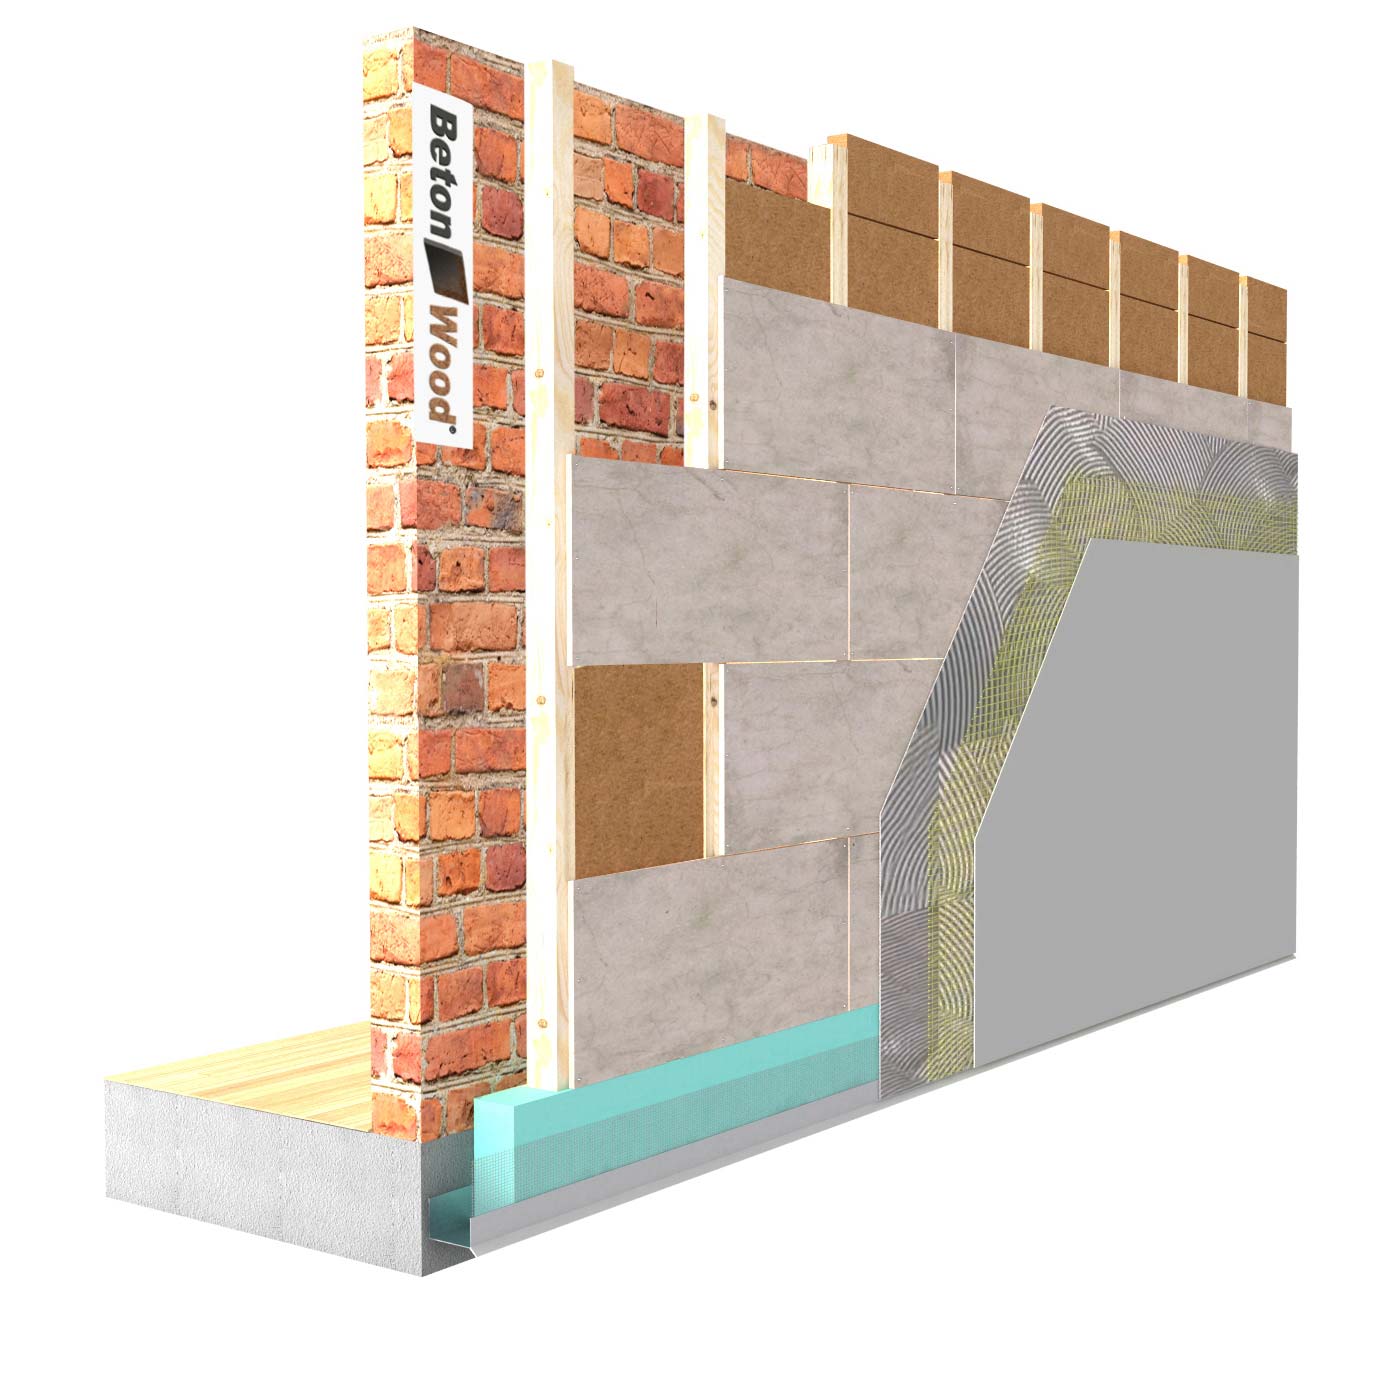 External insulation system with Protect wood fiber on masonry